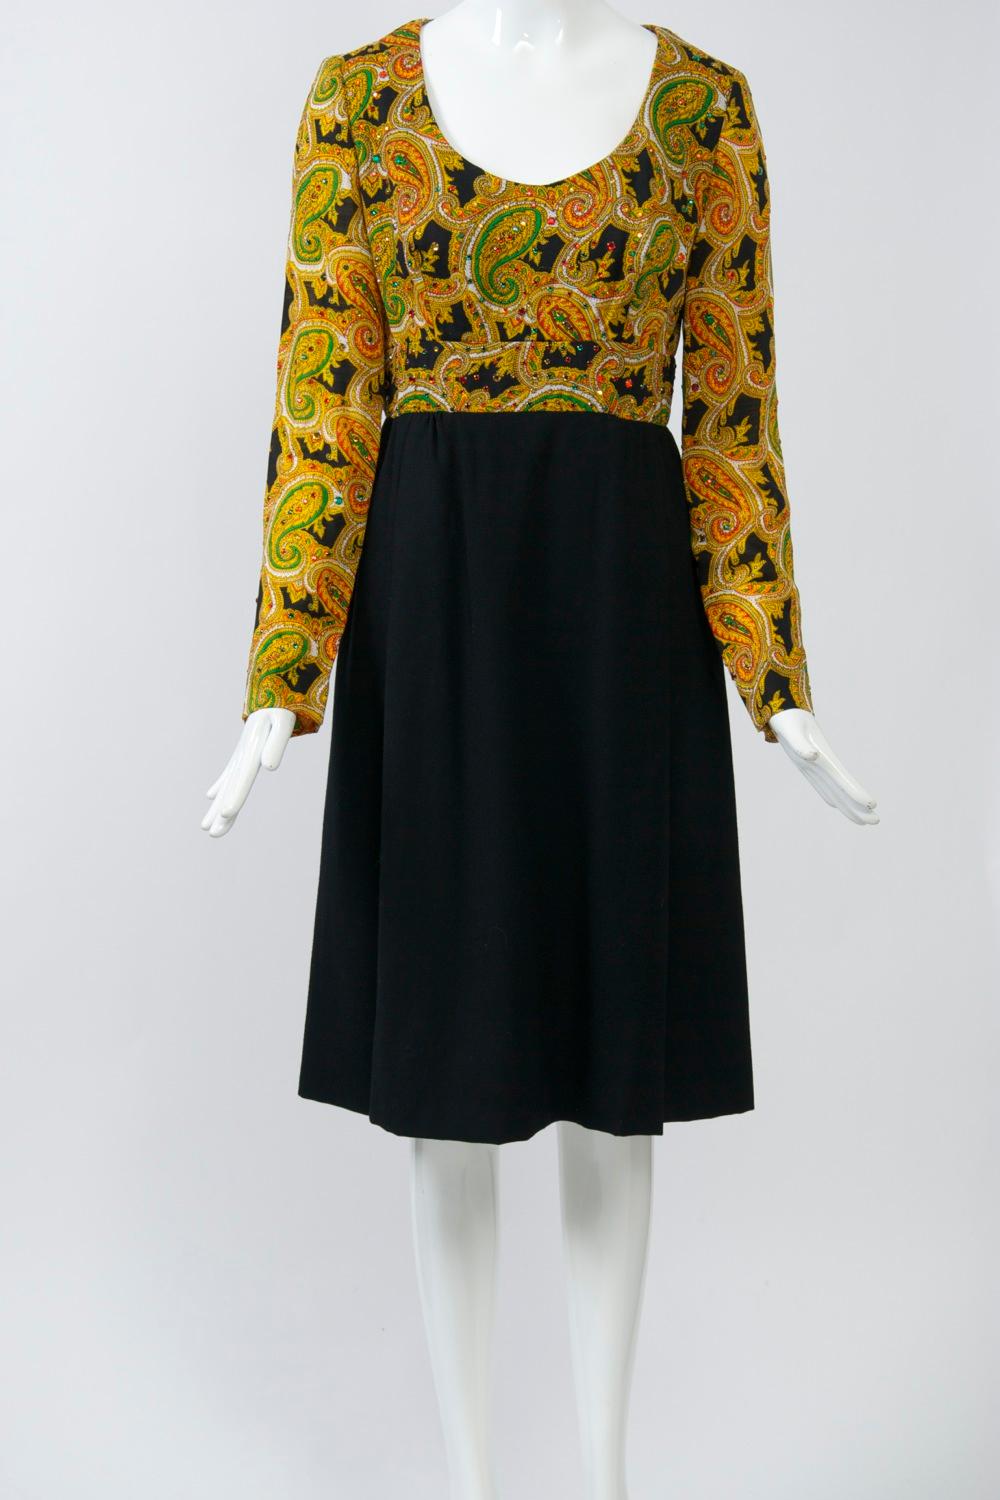 c.1970 dress by Victor Costa featuring a modified empire bodice of paisley wool challis has a scoop neck and is sprinkled with coordinating  red and green rhinestones. The set-in paisley waistband gives way to a black knit A-line skirt with soft